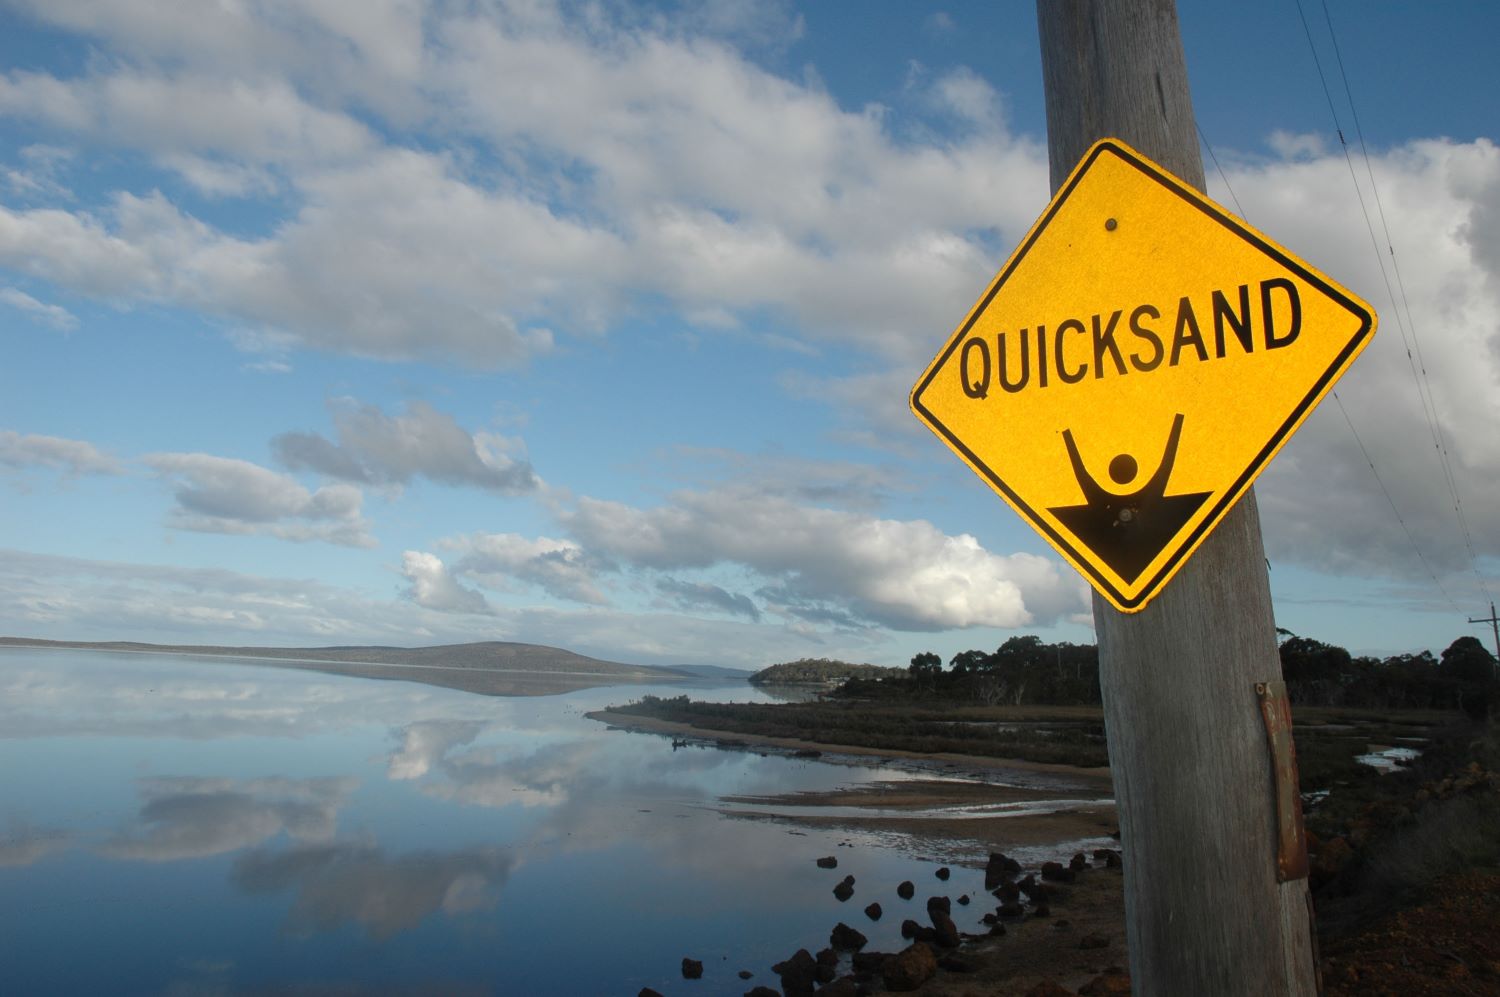 what to do if stuck in quicksand